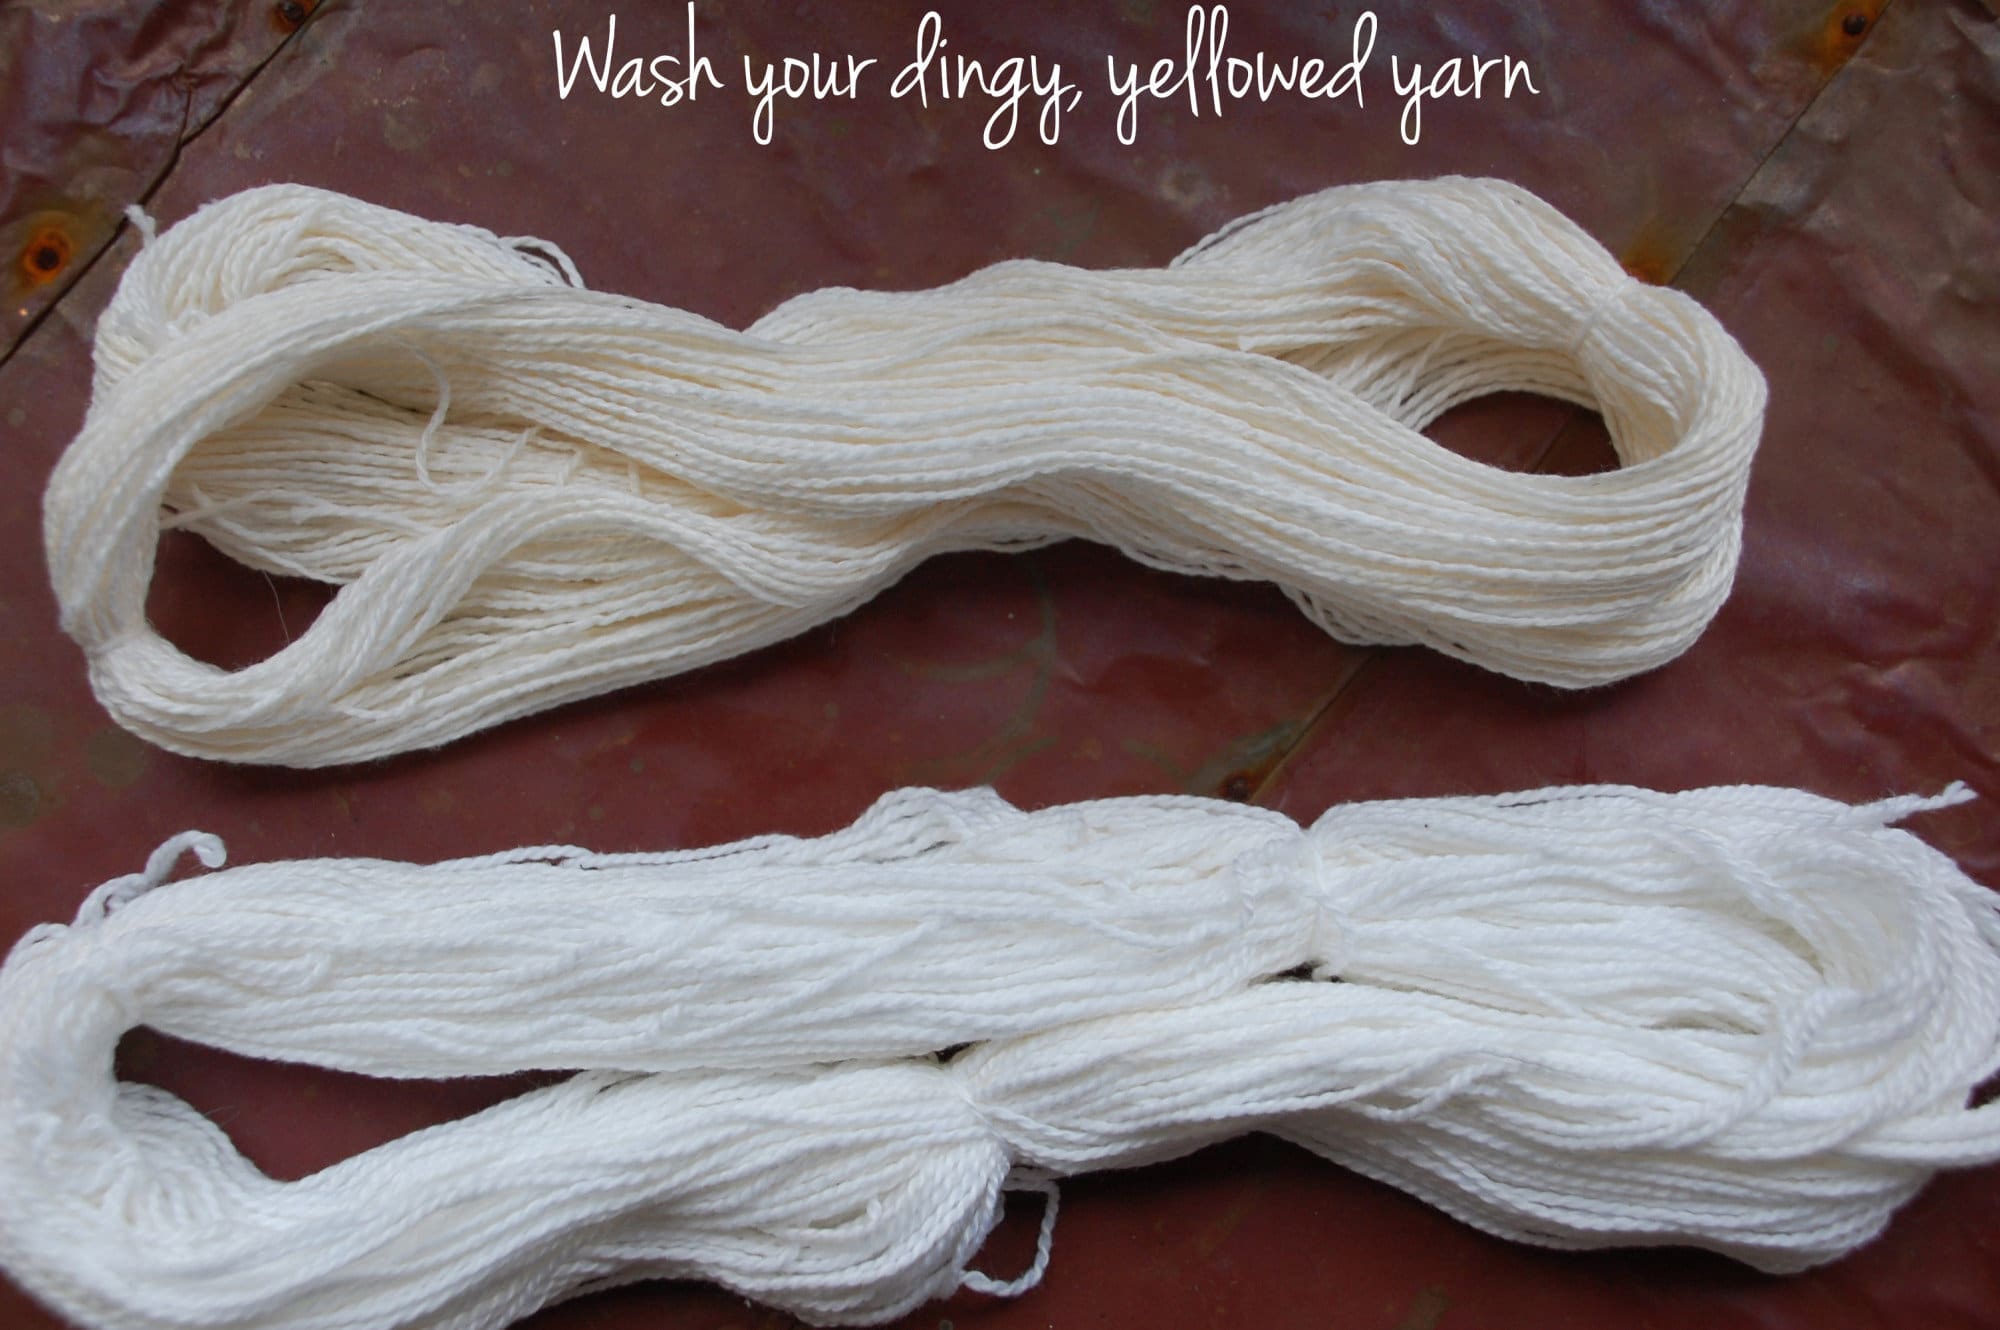 Wash your dingy, yellowed yarn